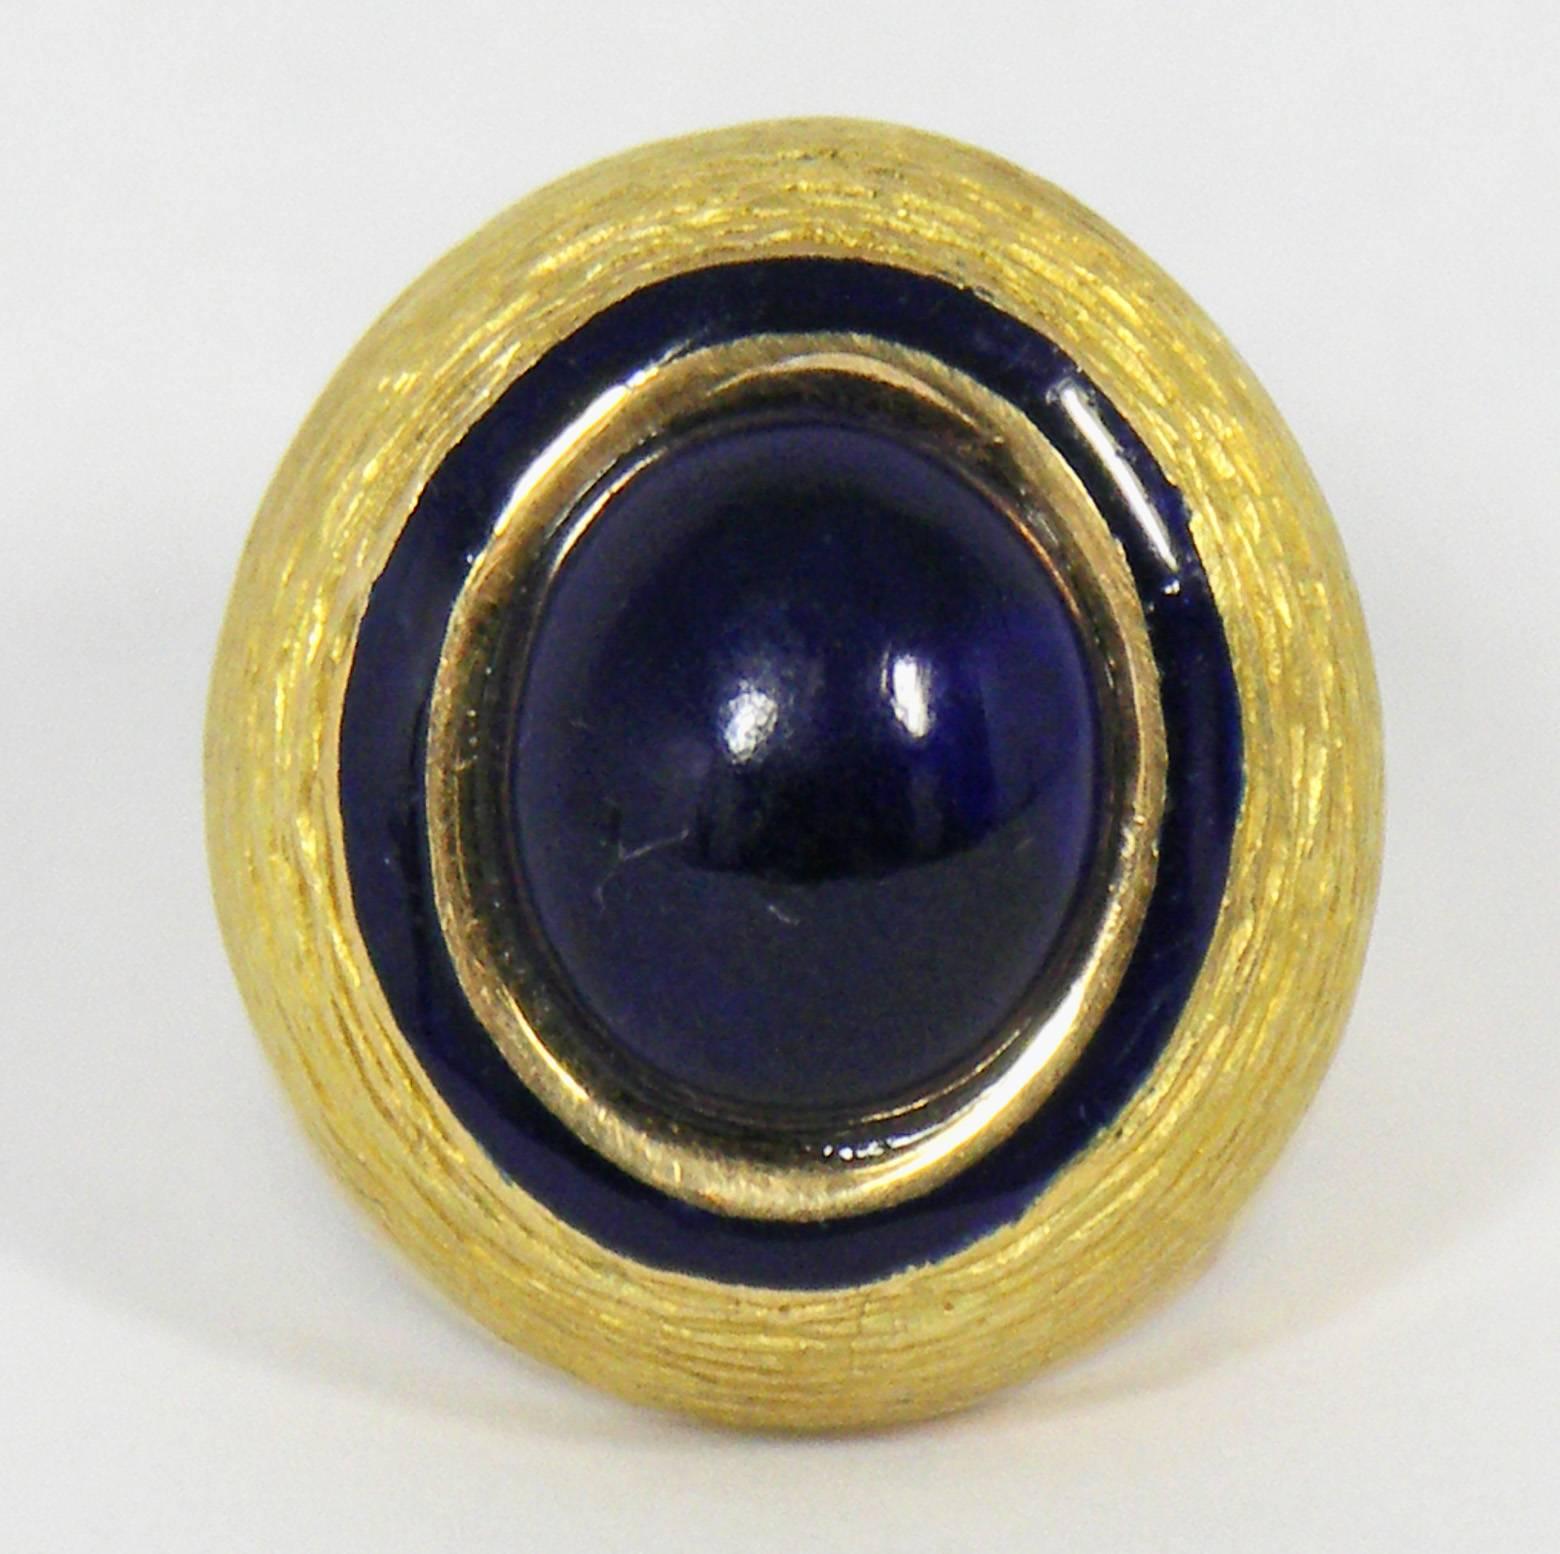 This stylish oval shaped 18k Yellow Gold ring is set with one oval
Lapis Lazuli cabochon measuring 15mm x 7mm. The navy blue enamel
line surrounds and highlights the center cabochon. The ring is currently
size 5, but can easily be resized. It weighs